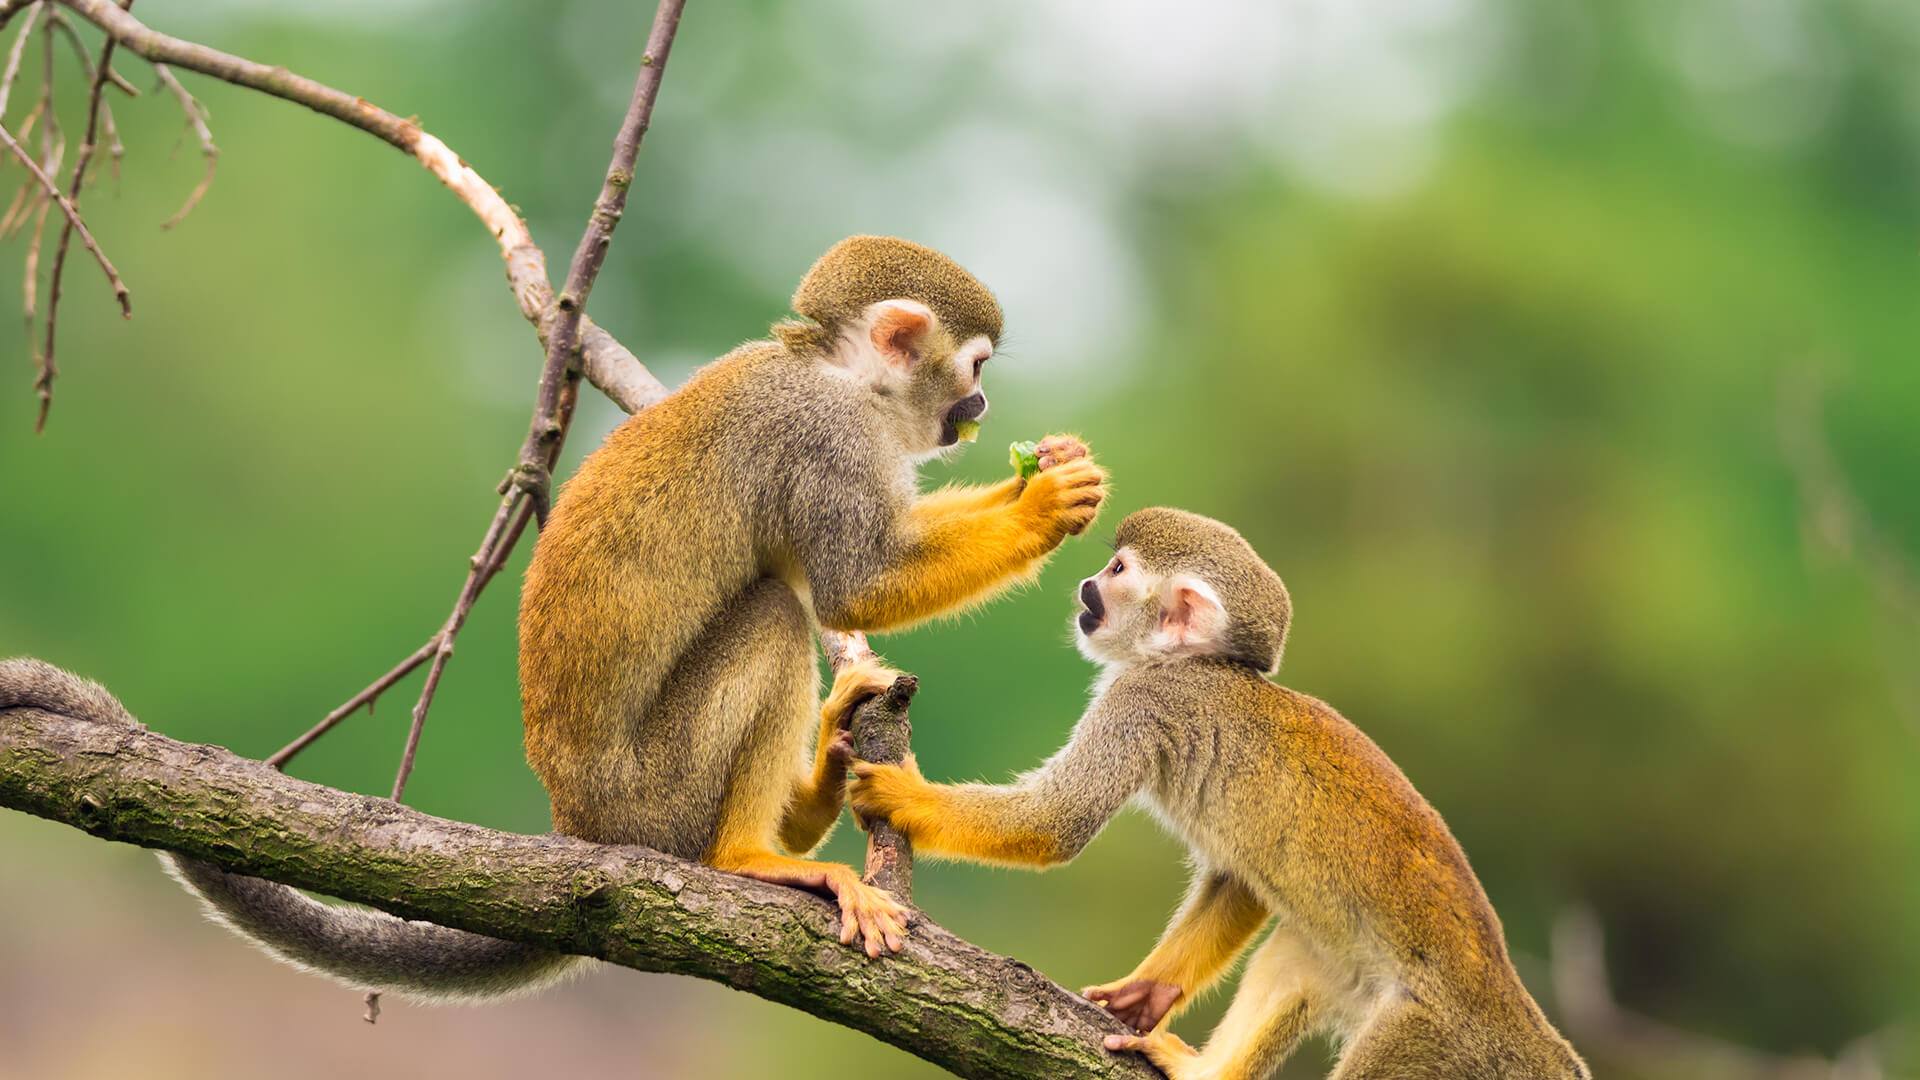 Squirrel monkeys eating fruit while sitting on a tree branch in a jungle